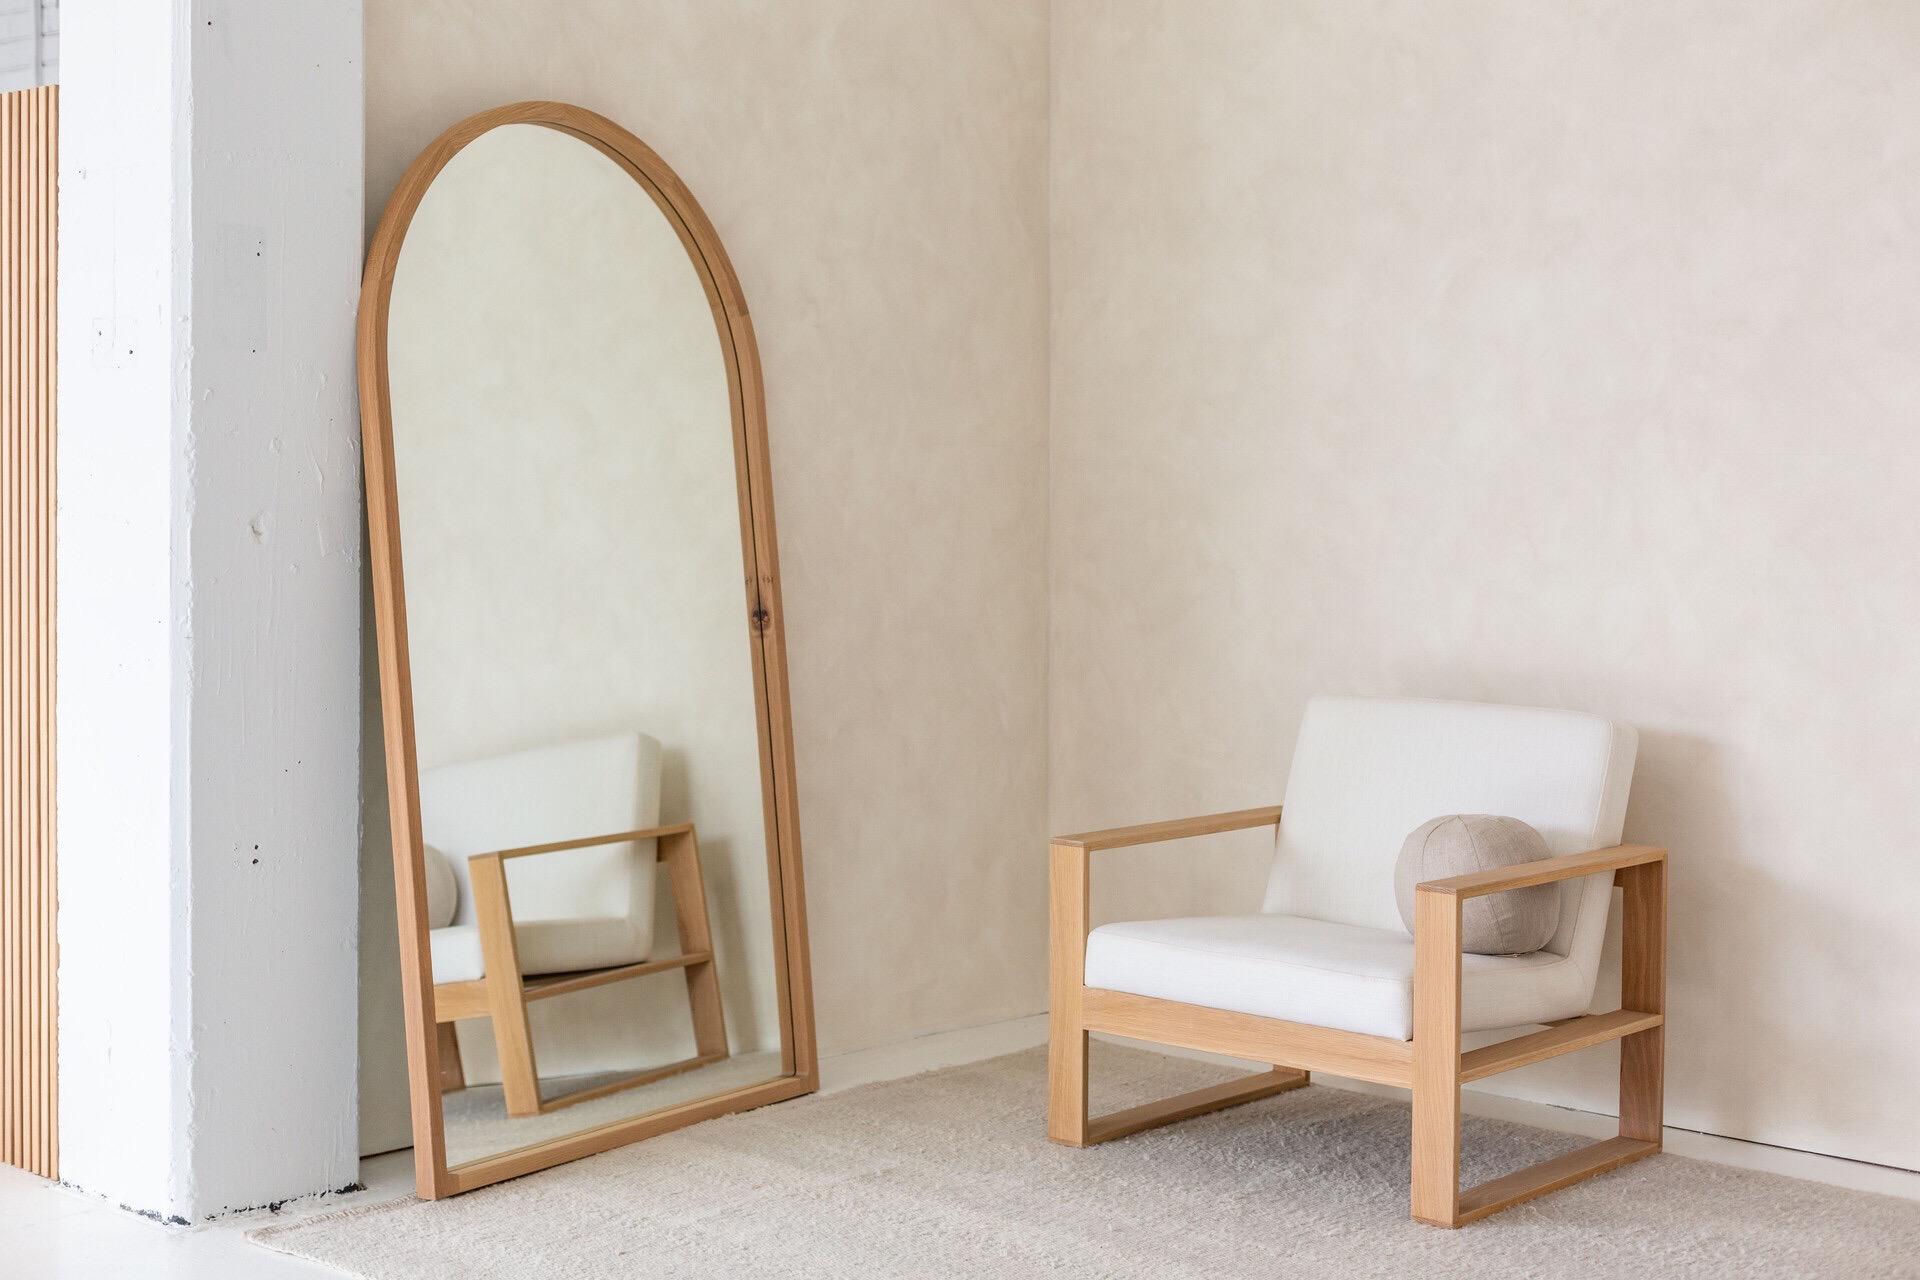 The Arch mirror is beautifully simple, handmade and curved with solid wood, this piece will add a warmth and minimalist sophistication to any interior. Featured here in American oak, this full length mirror is available in a range of timbers and